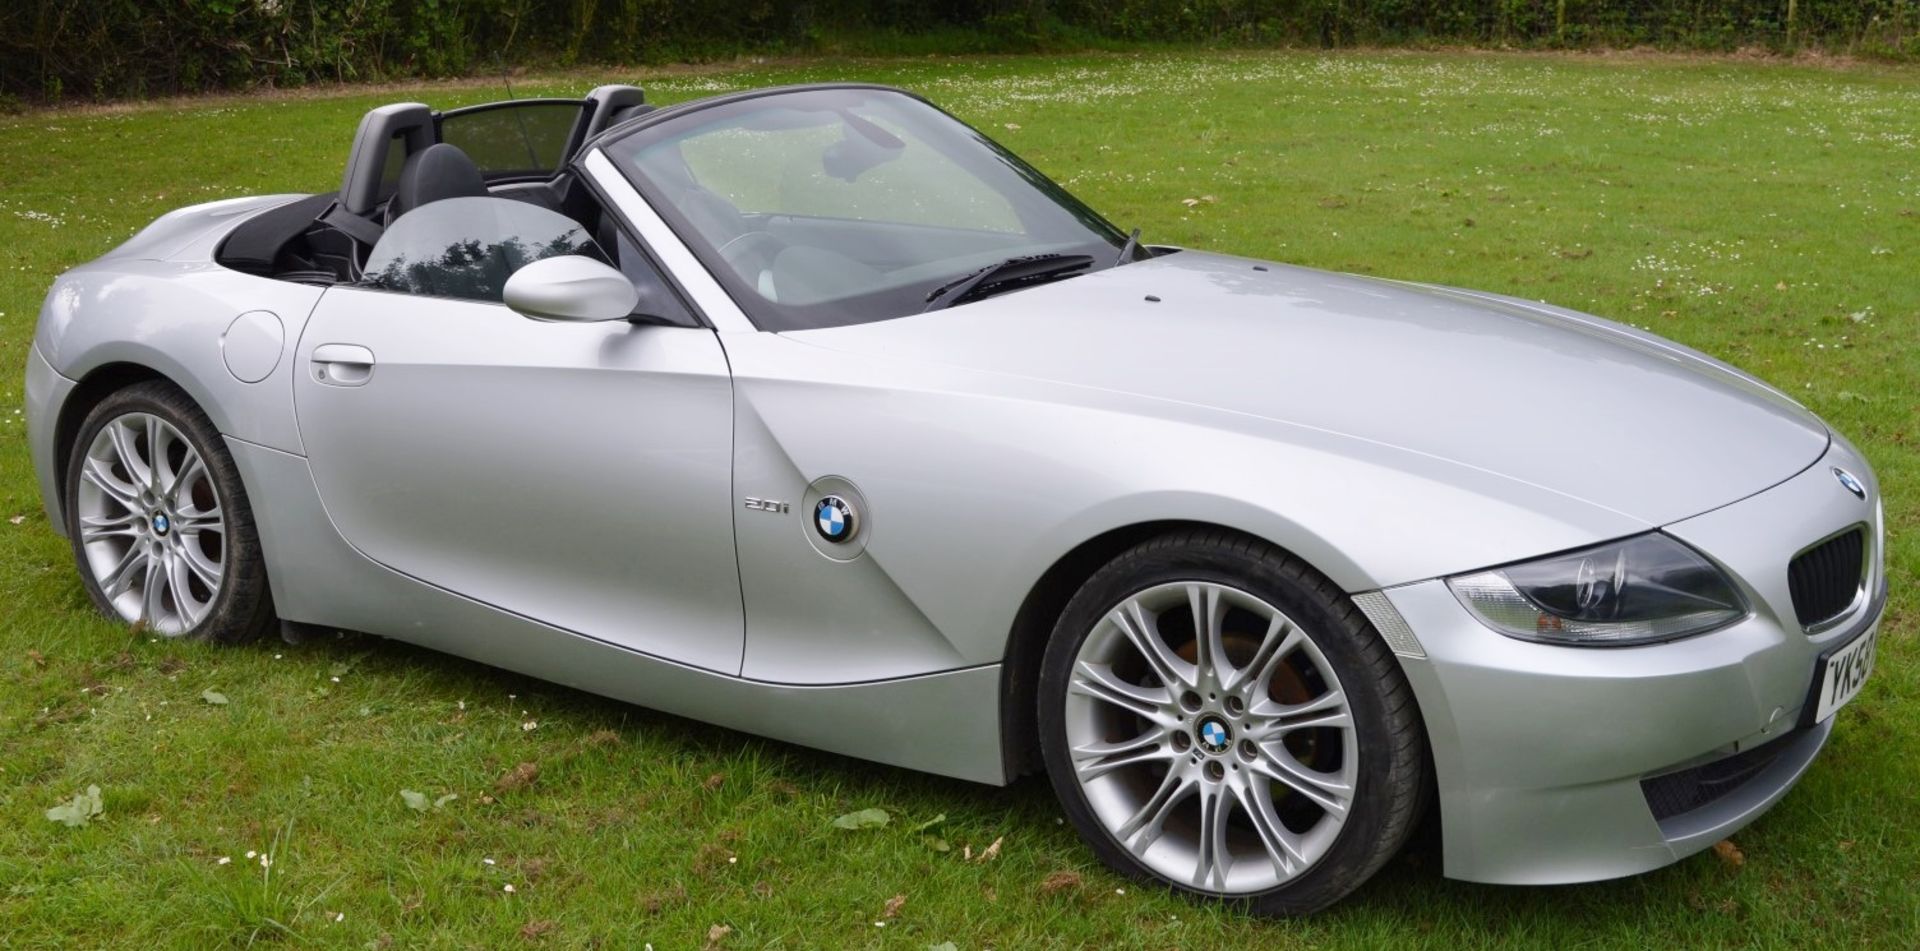 1 x BMW M Sport Convertible Z4 2.0i - 2008 58 Plate - 54,000 Miles - Silver Finish - Power Roof - - Image 3 of 47